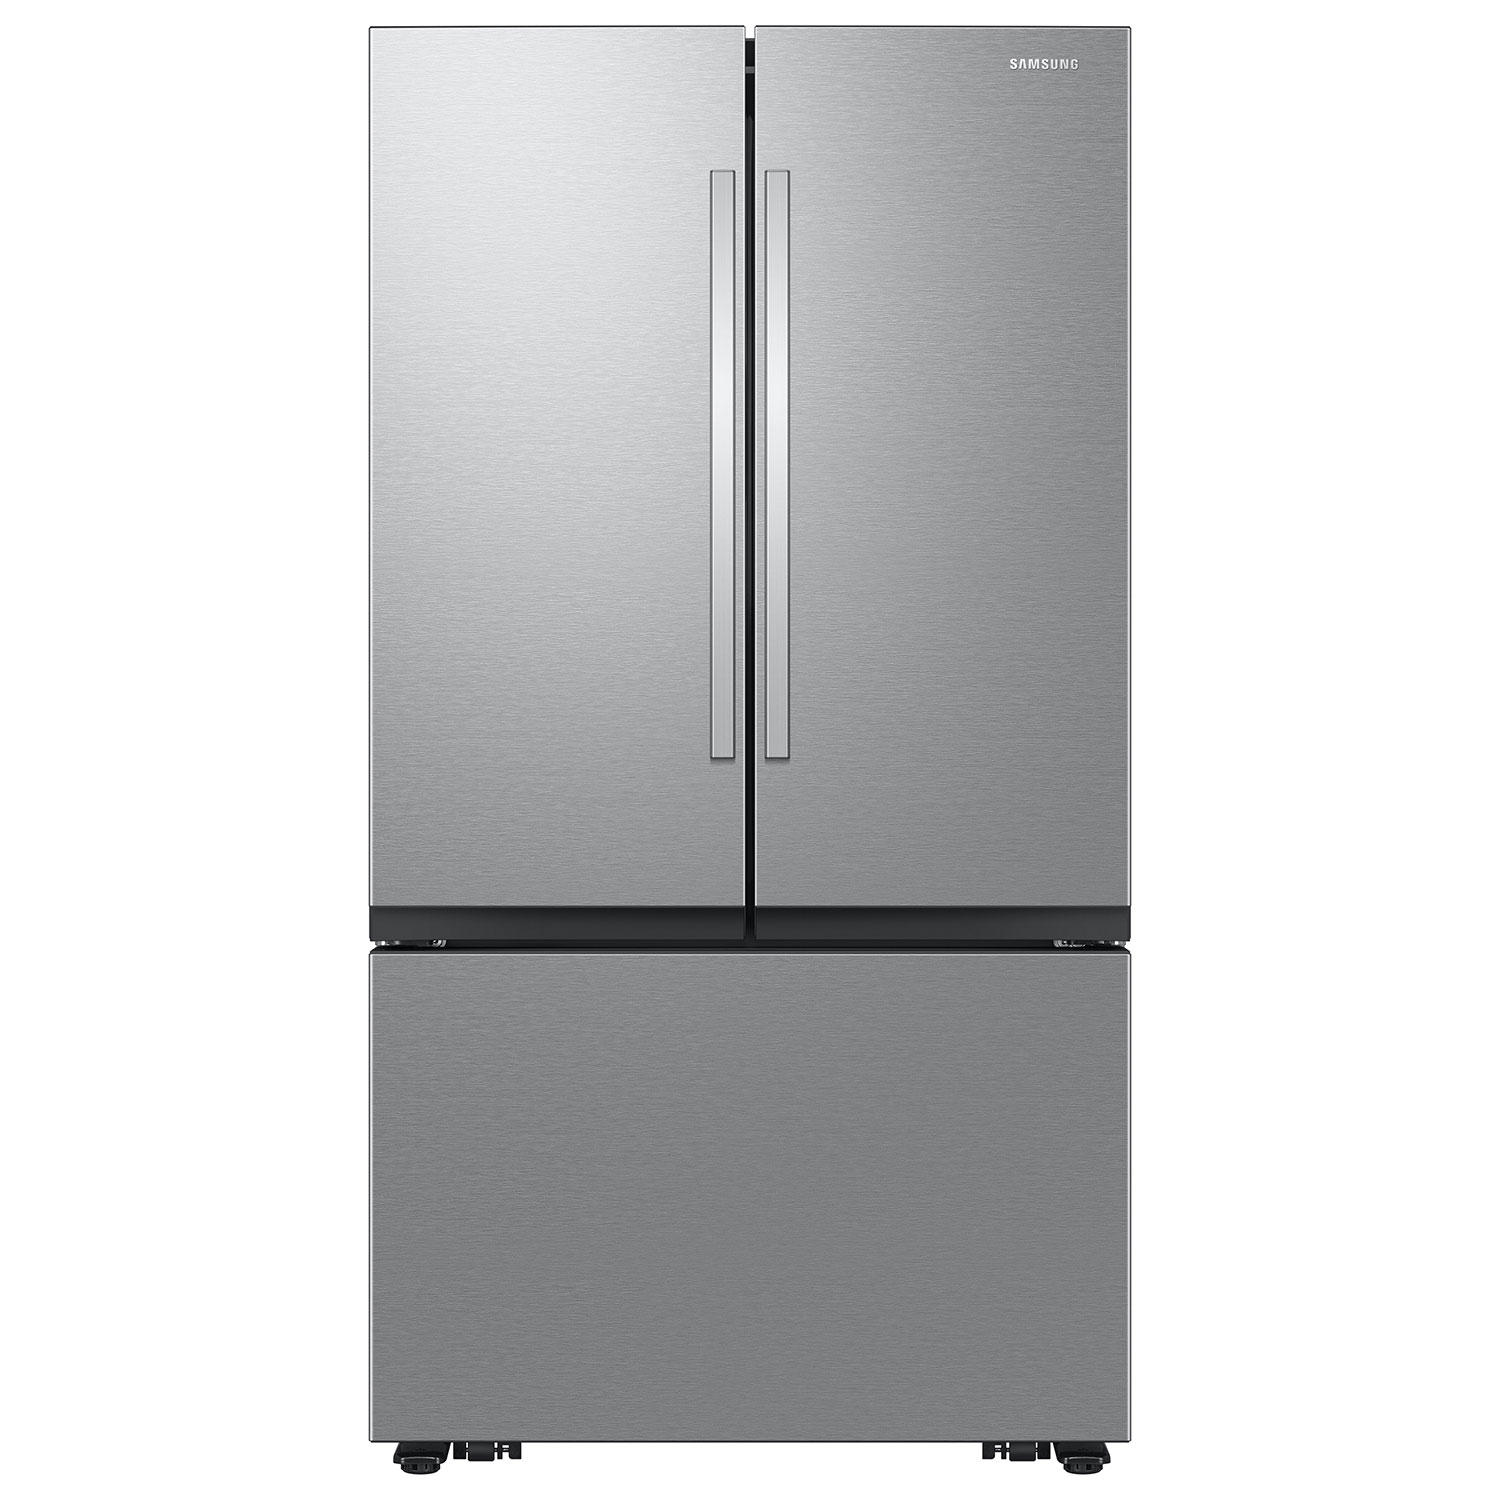 Samsung 32 Cu. Ft. Mega Capacity French Door Refrigerator w/ Dual Auto Ice Maker (Stainless Steel)